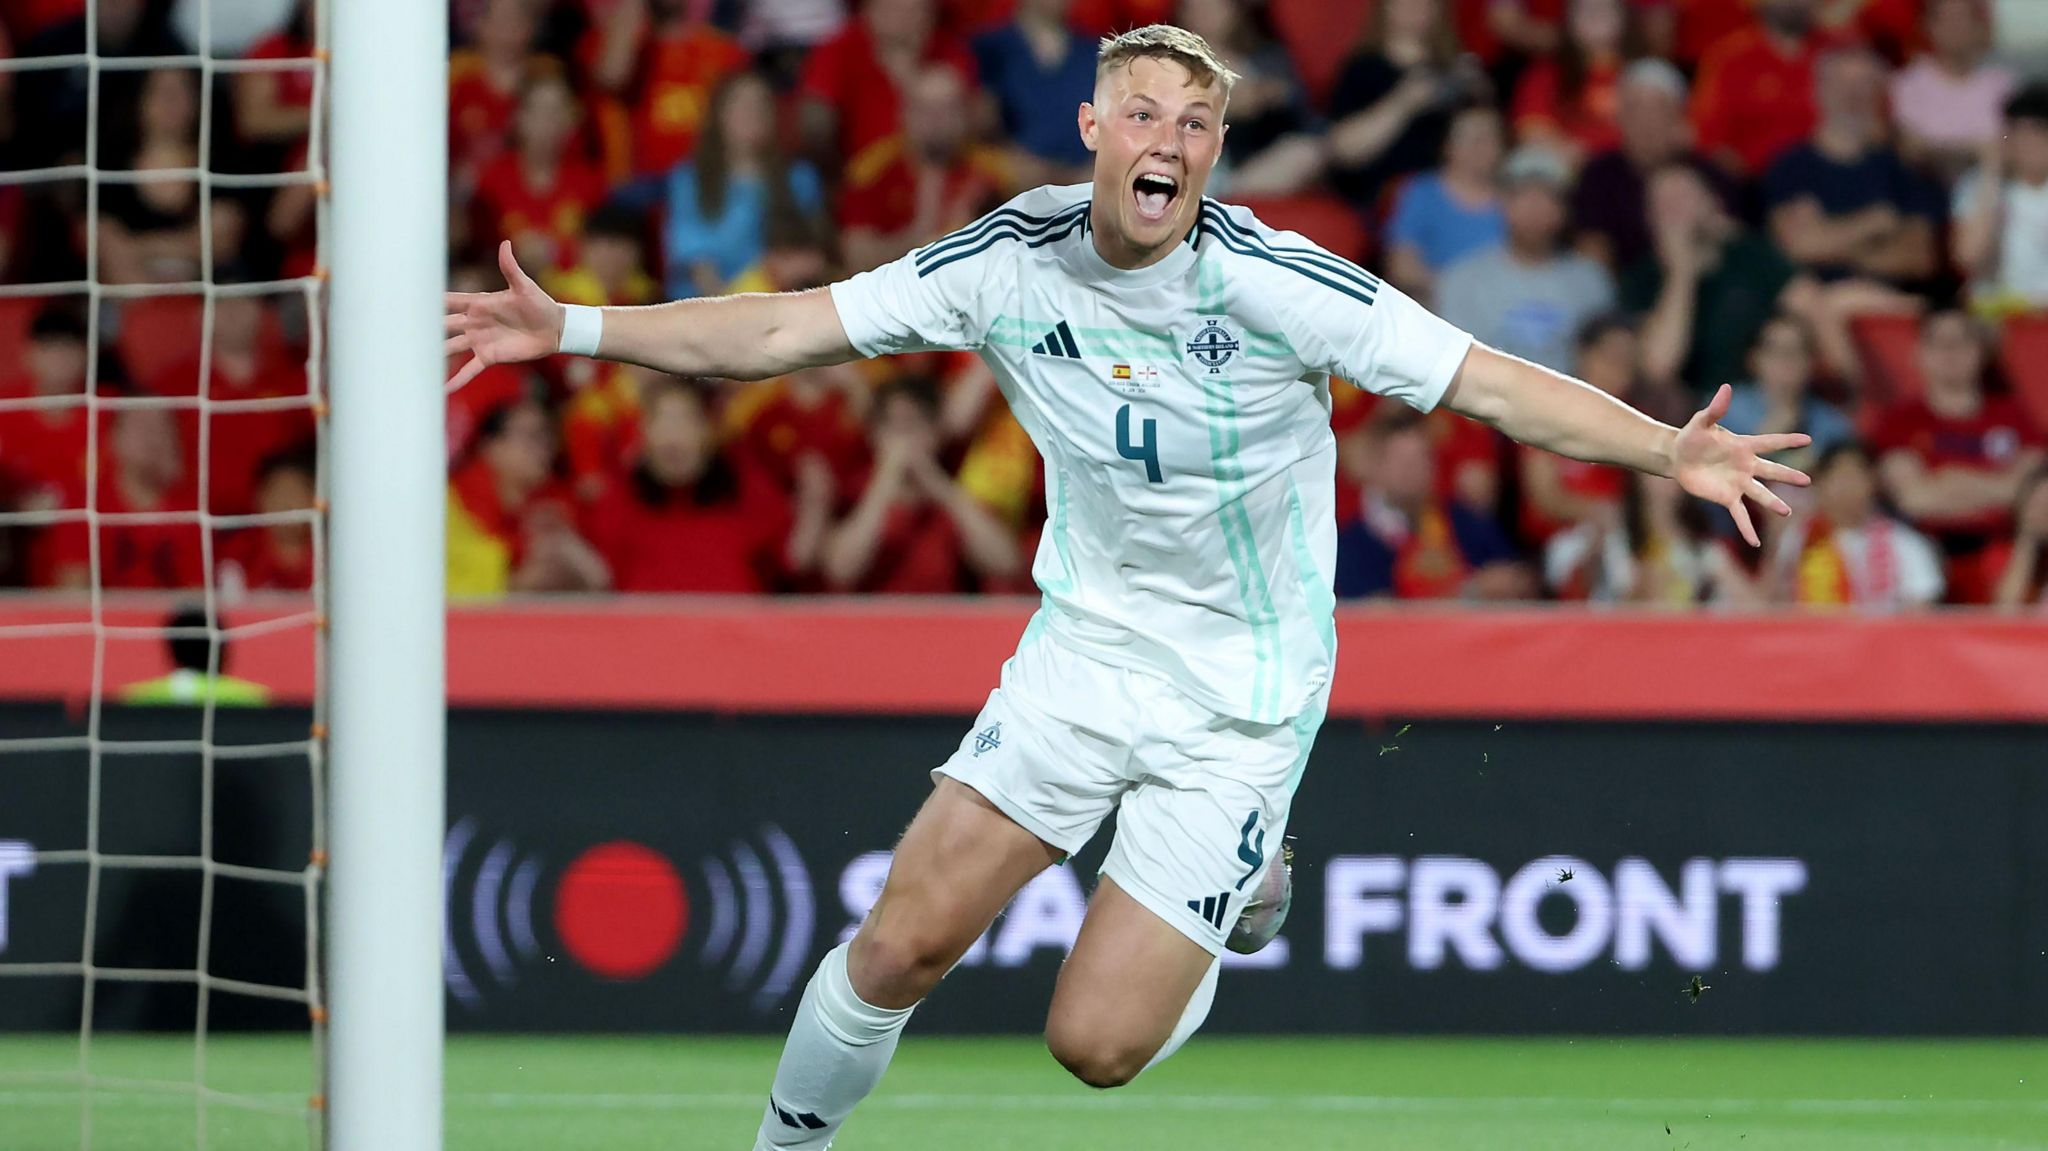 Spain show their class to beat Northern Ireland - BBC Sport